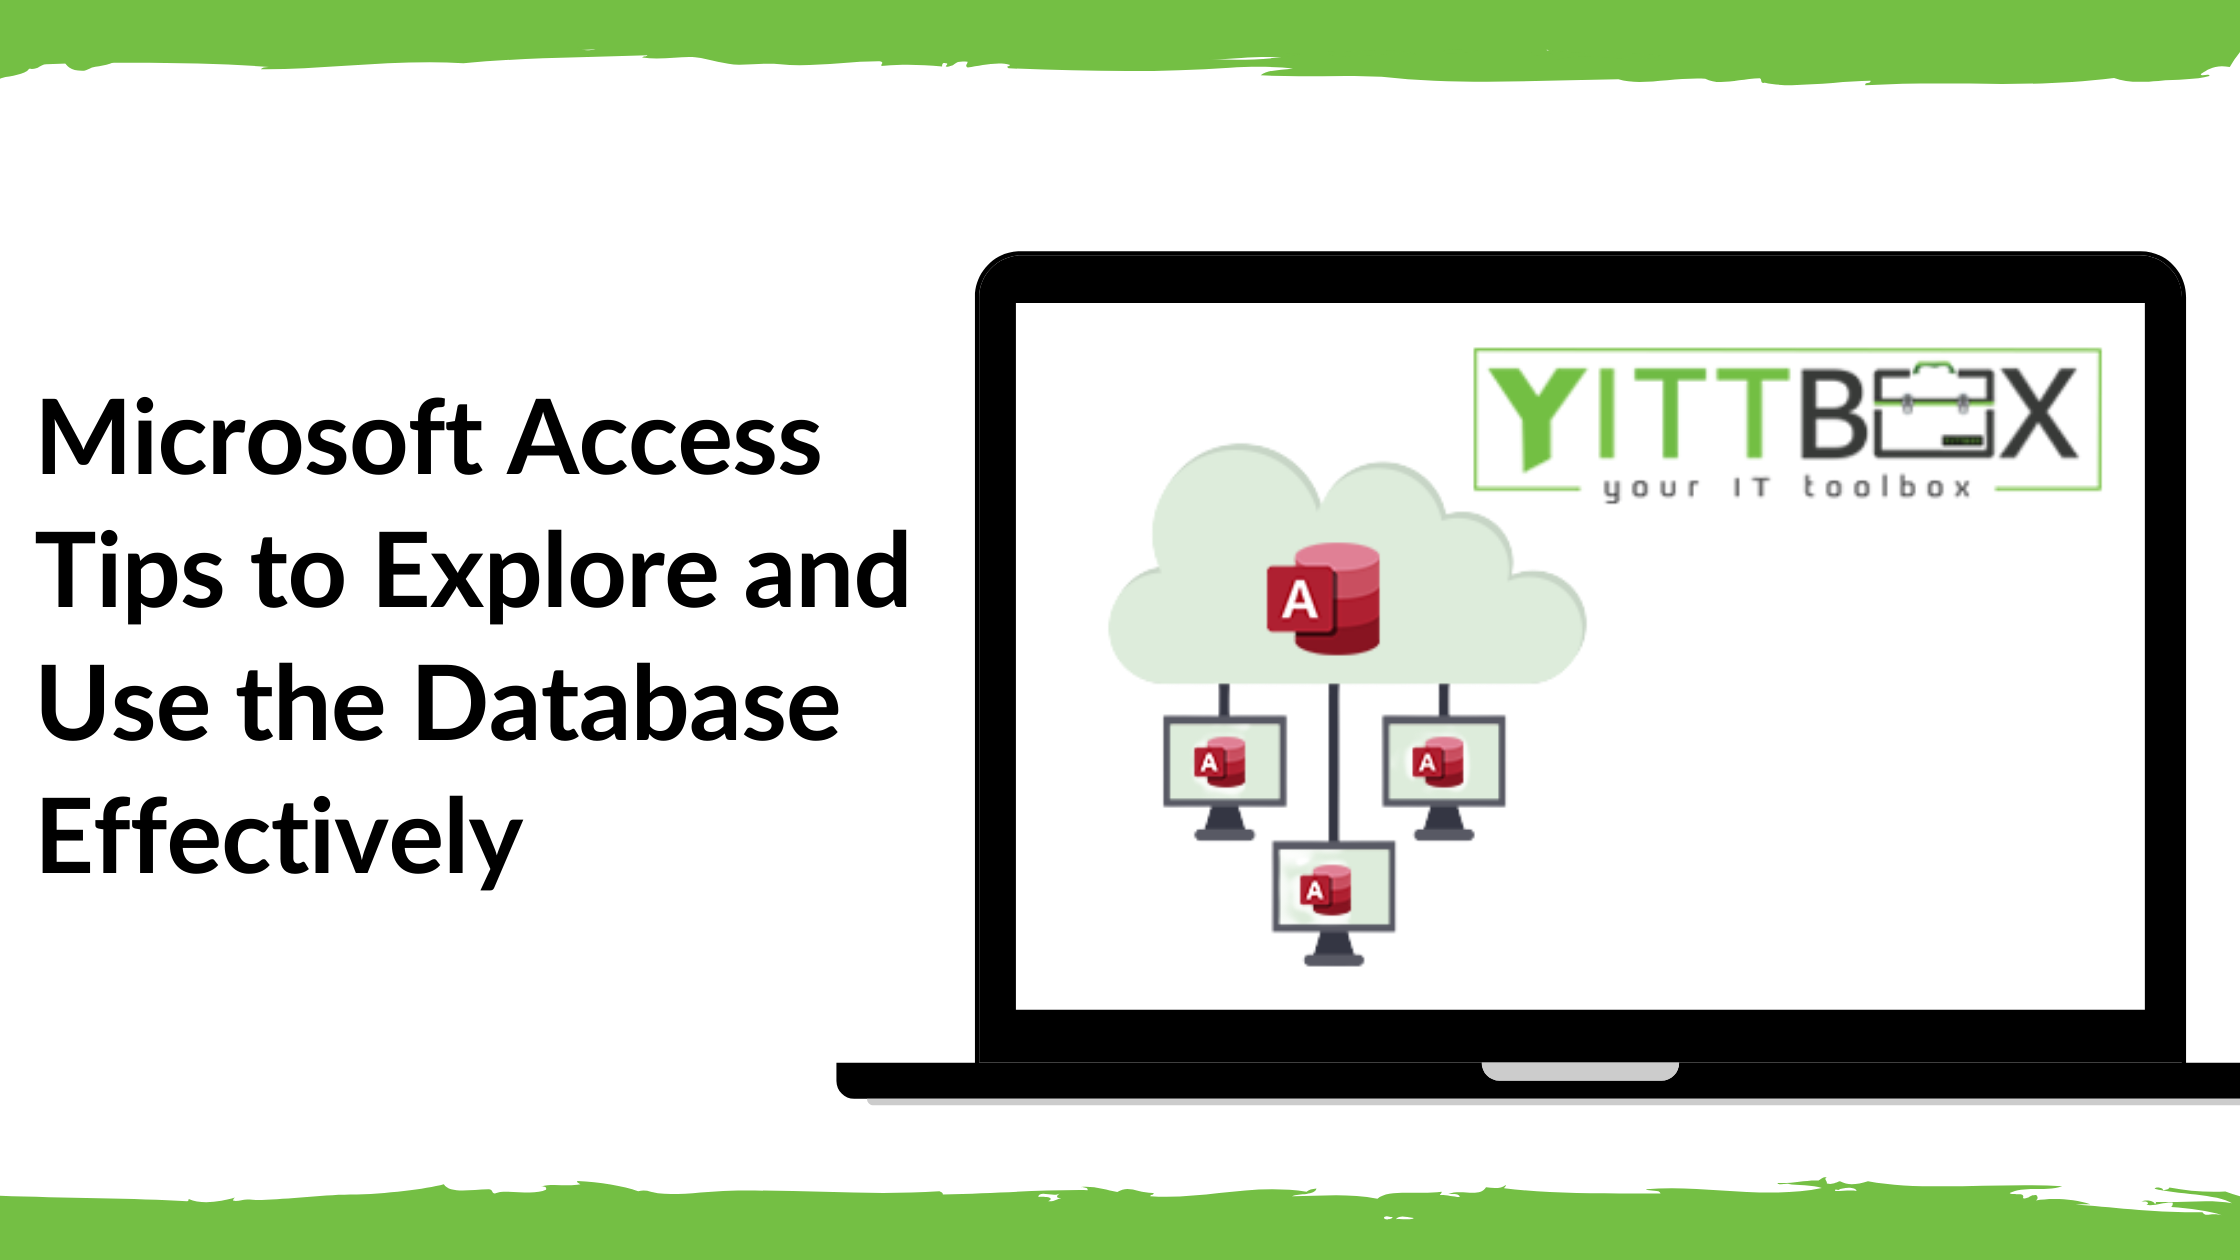 Microsoft Access Tips to Explore and Use the Database Effectively